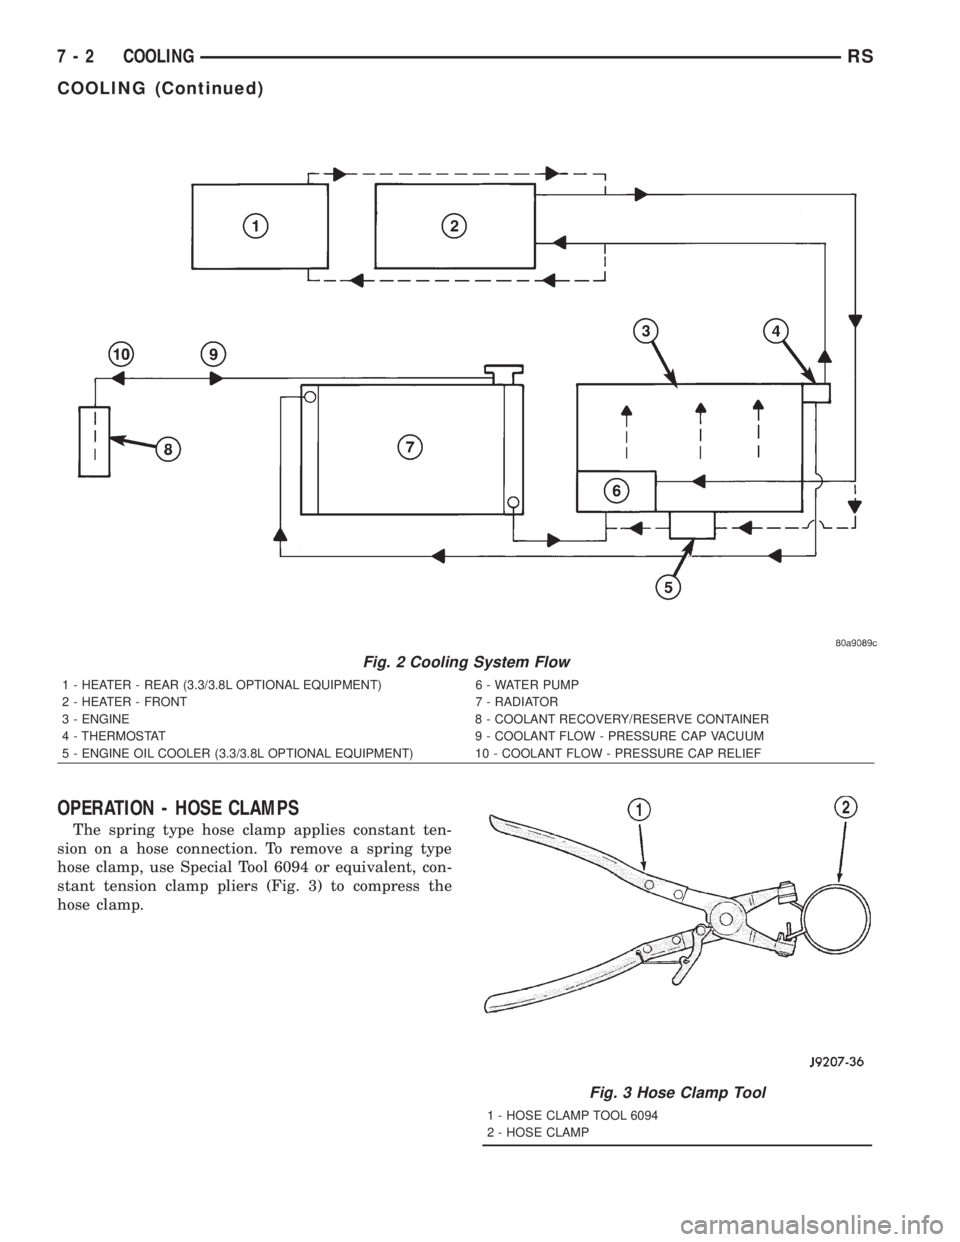 CHRYSLER VOYAGER 2001  Service Manual OPERATION - HOSE CLAMPS
The spring type hose clamp applies constant ten-
sion on a hose connection. To remove a spring type
hose clamp, use Special Tool 6094 or equivalent, con-
stant tension clamp pl